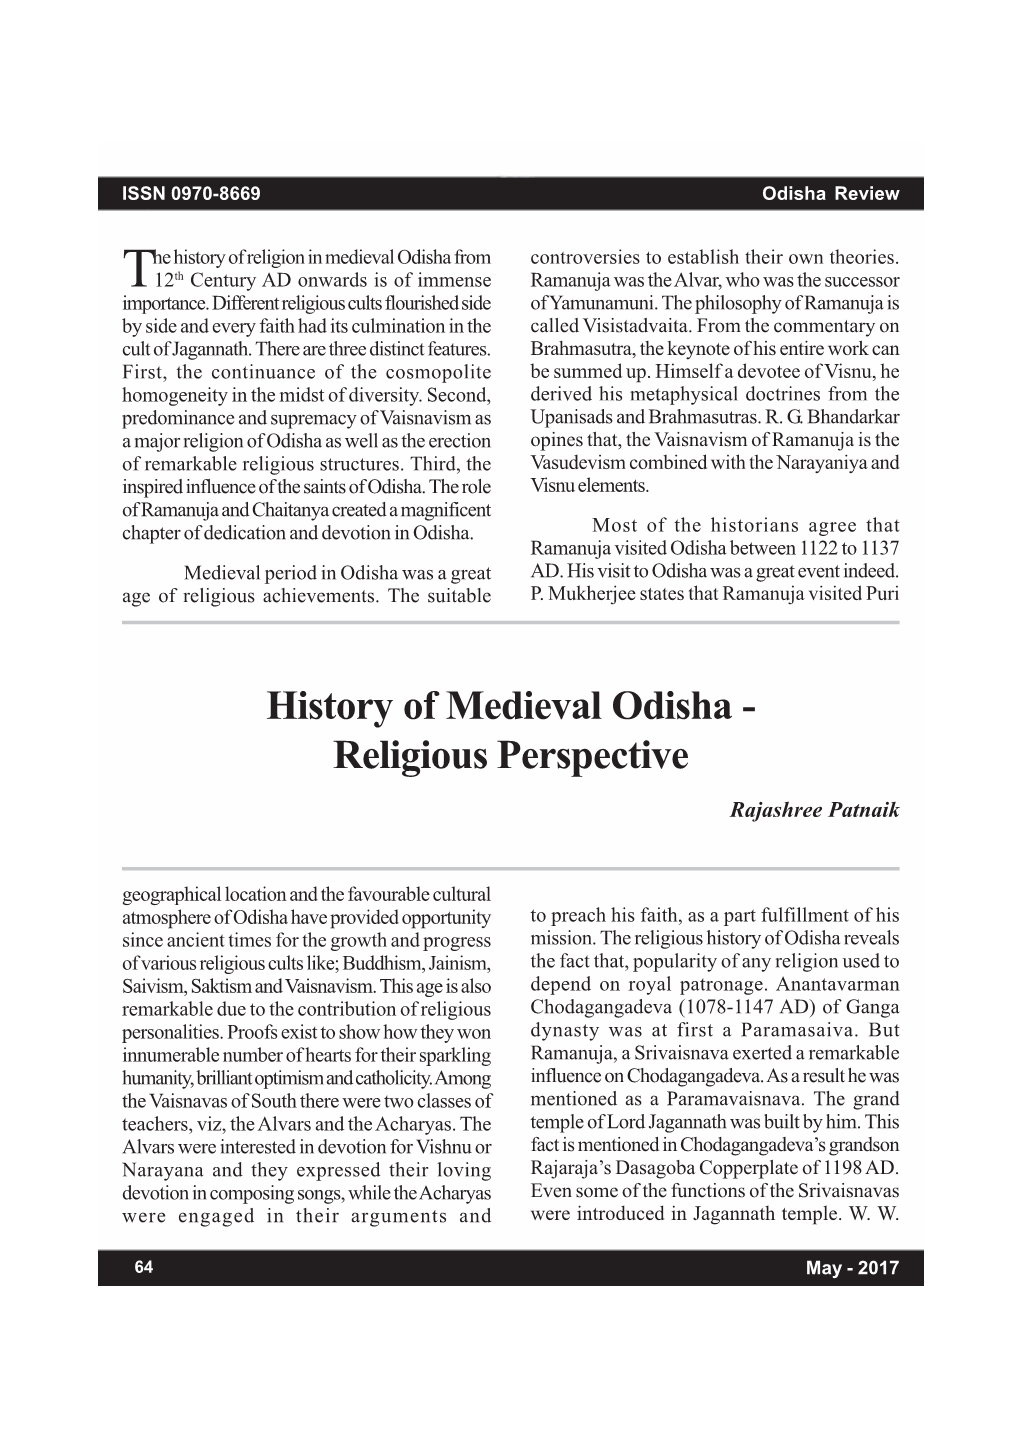 History of Medieval Odisha - Religious Perspective